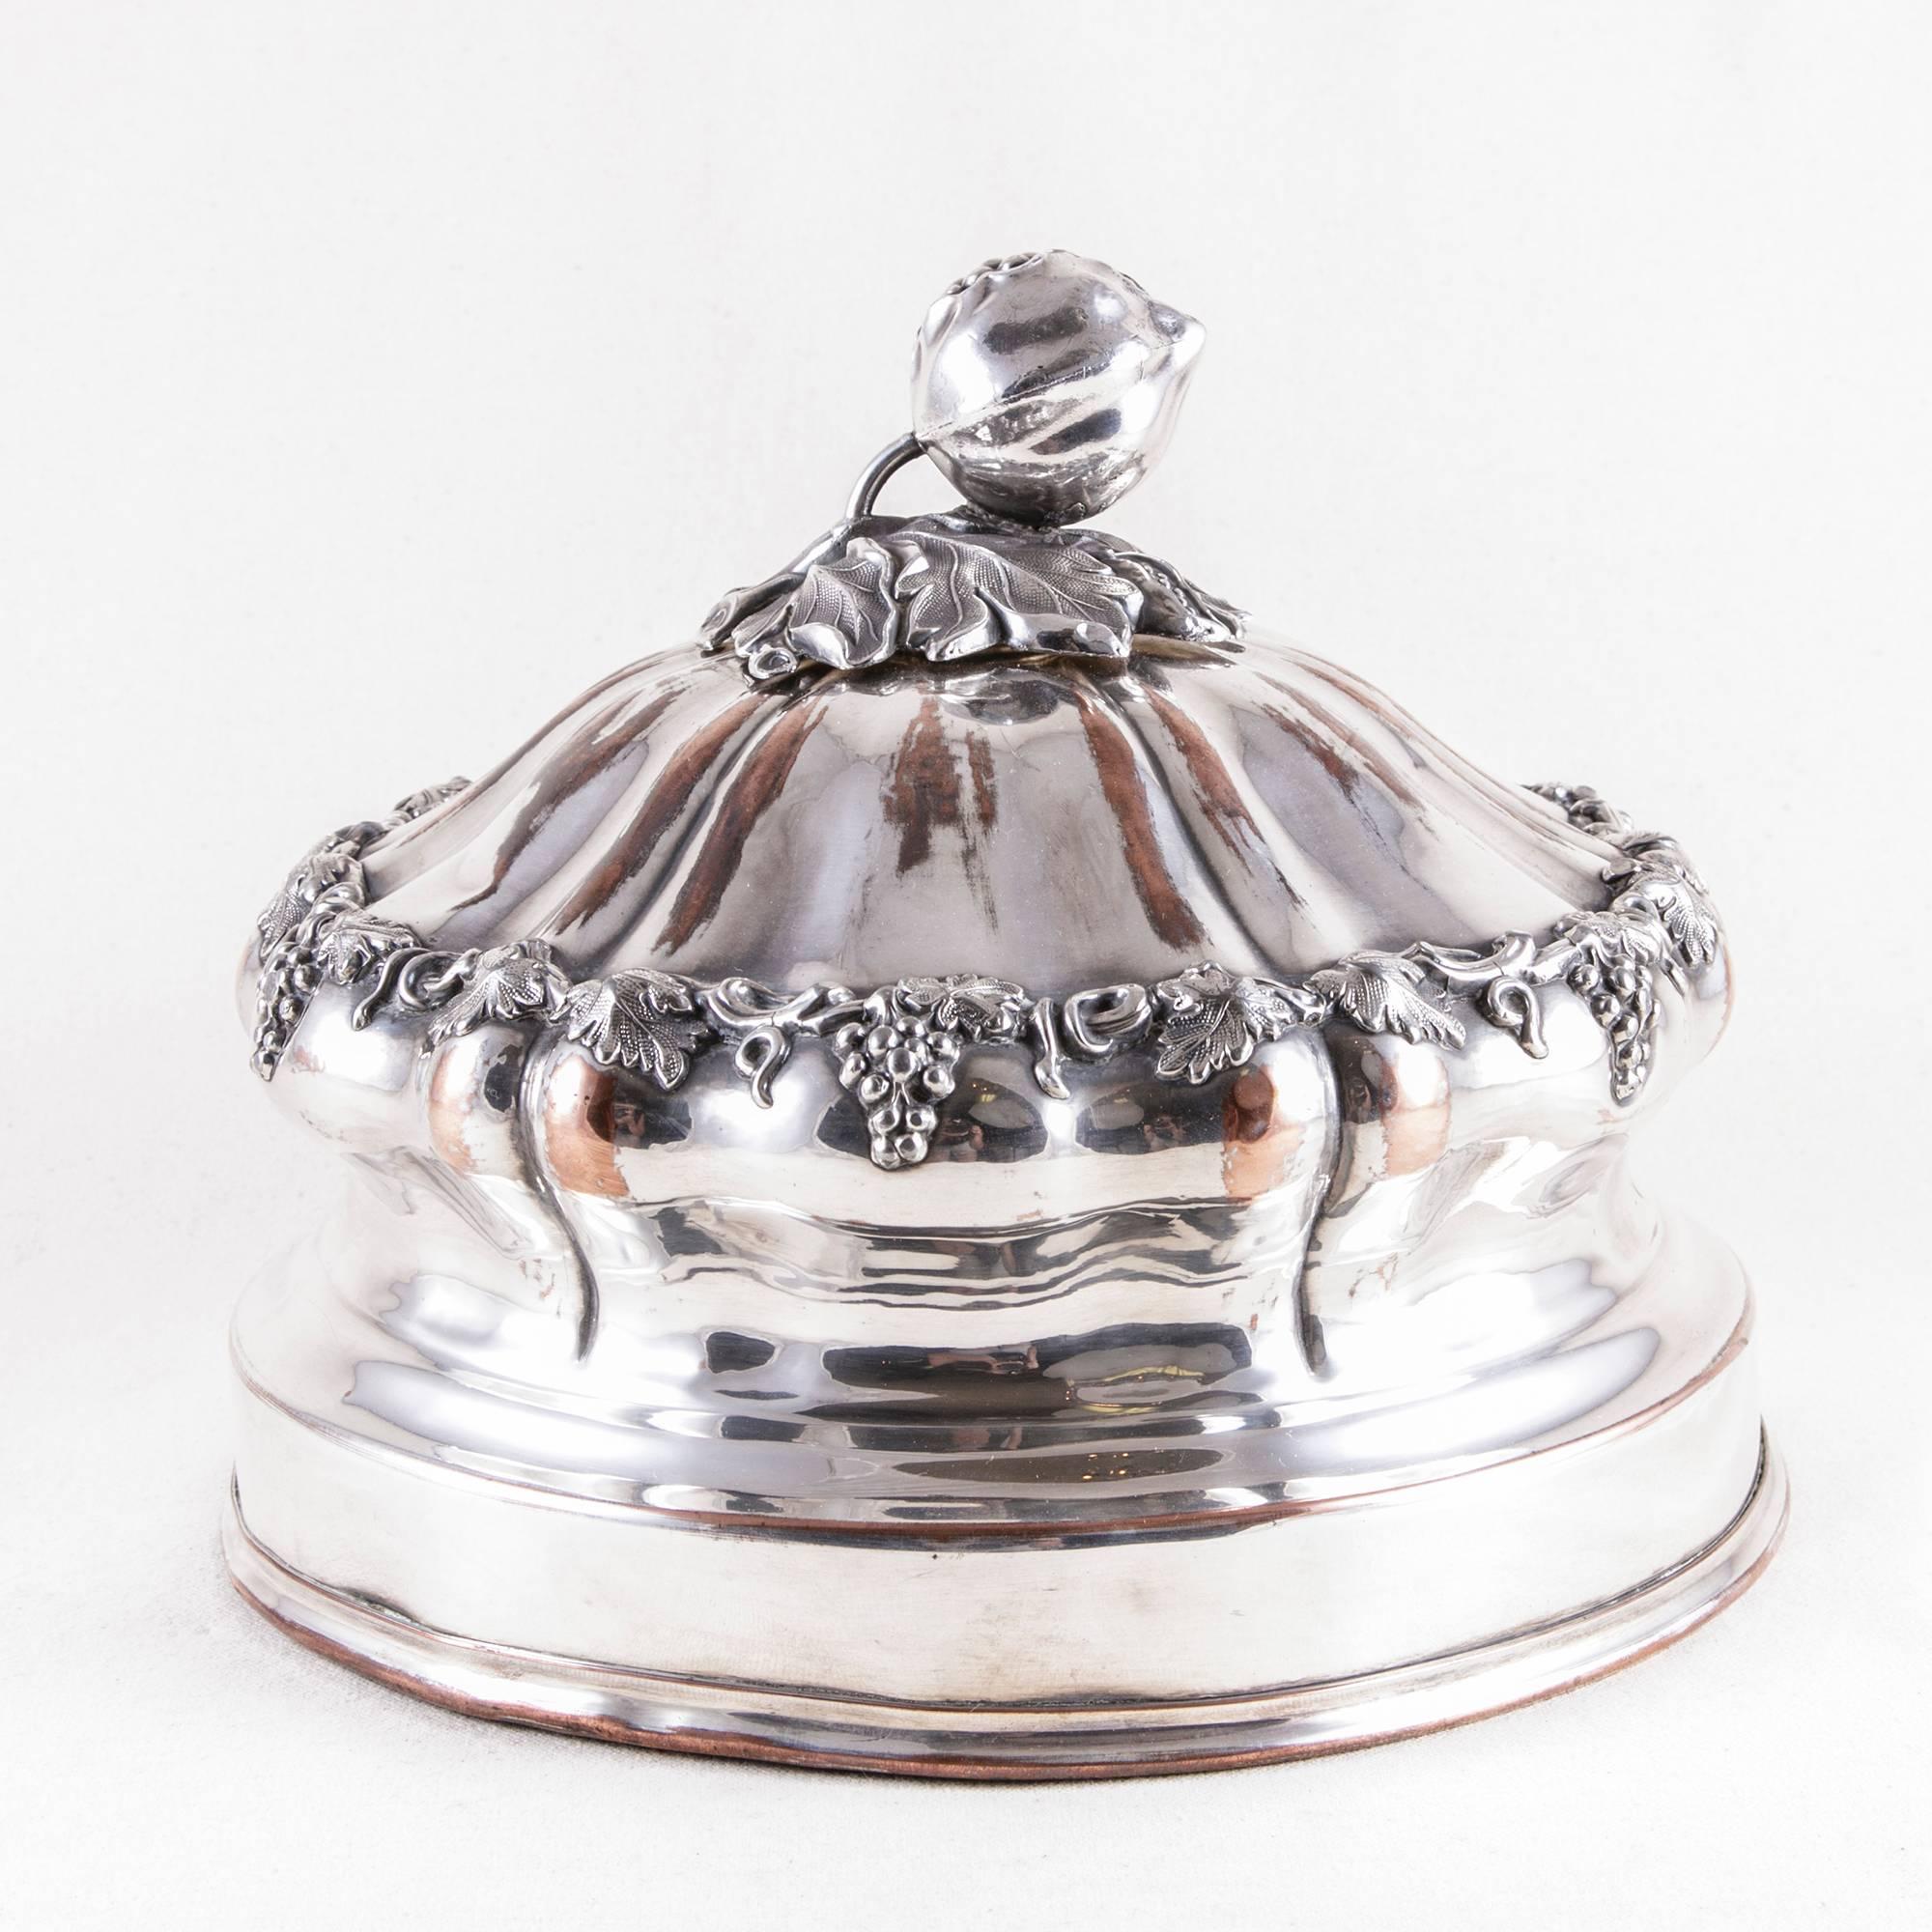 19th Century French Silver Hotel Dome Serving Piece Food Warmer Dish Cover For Sale 3